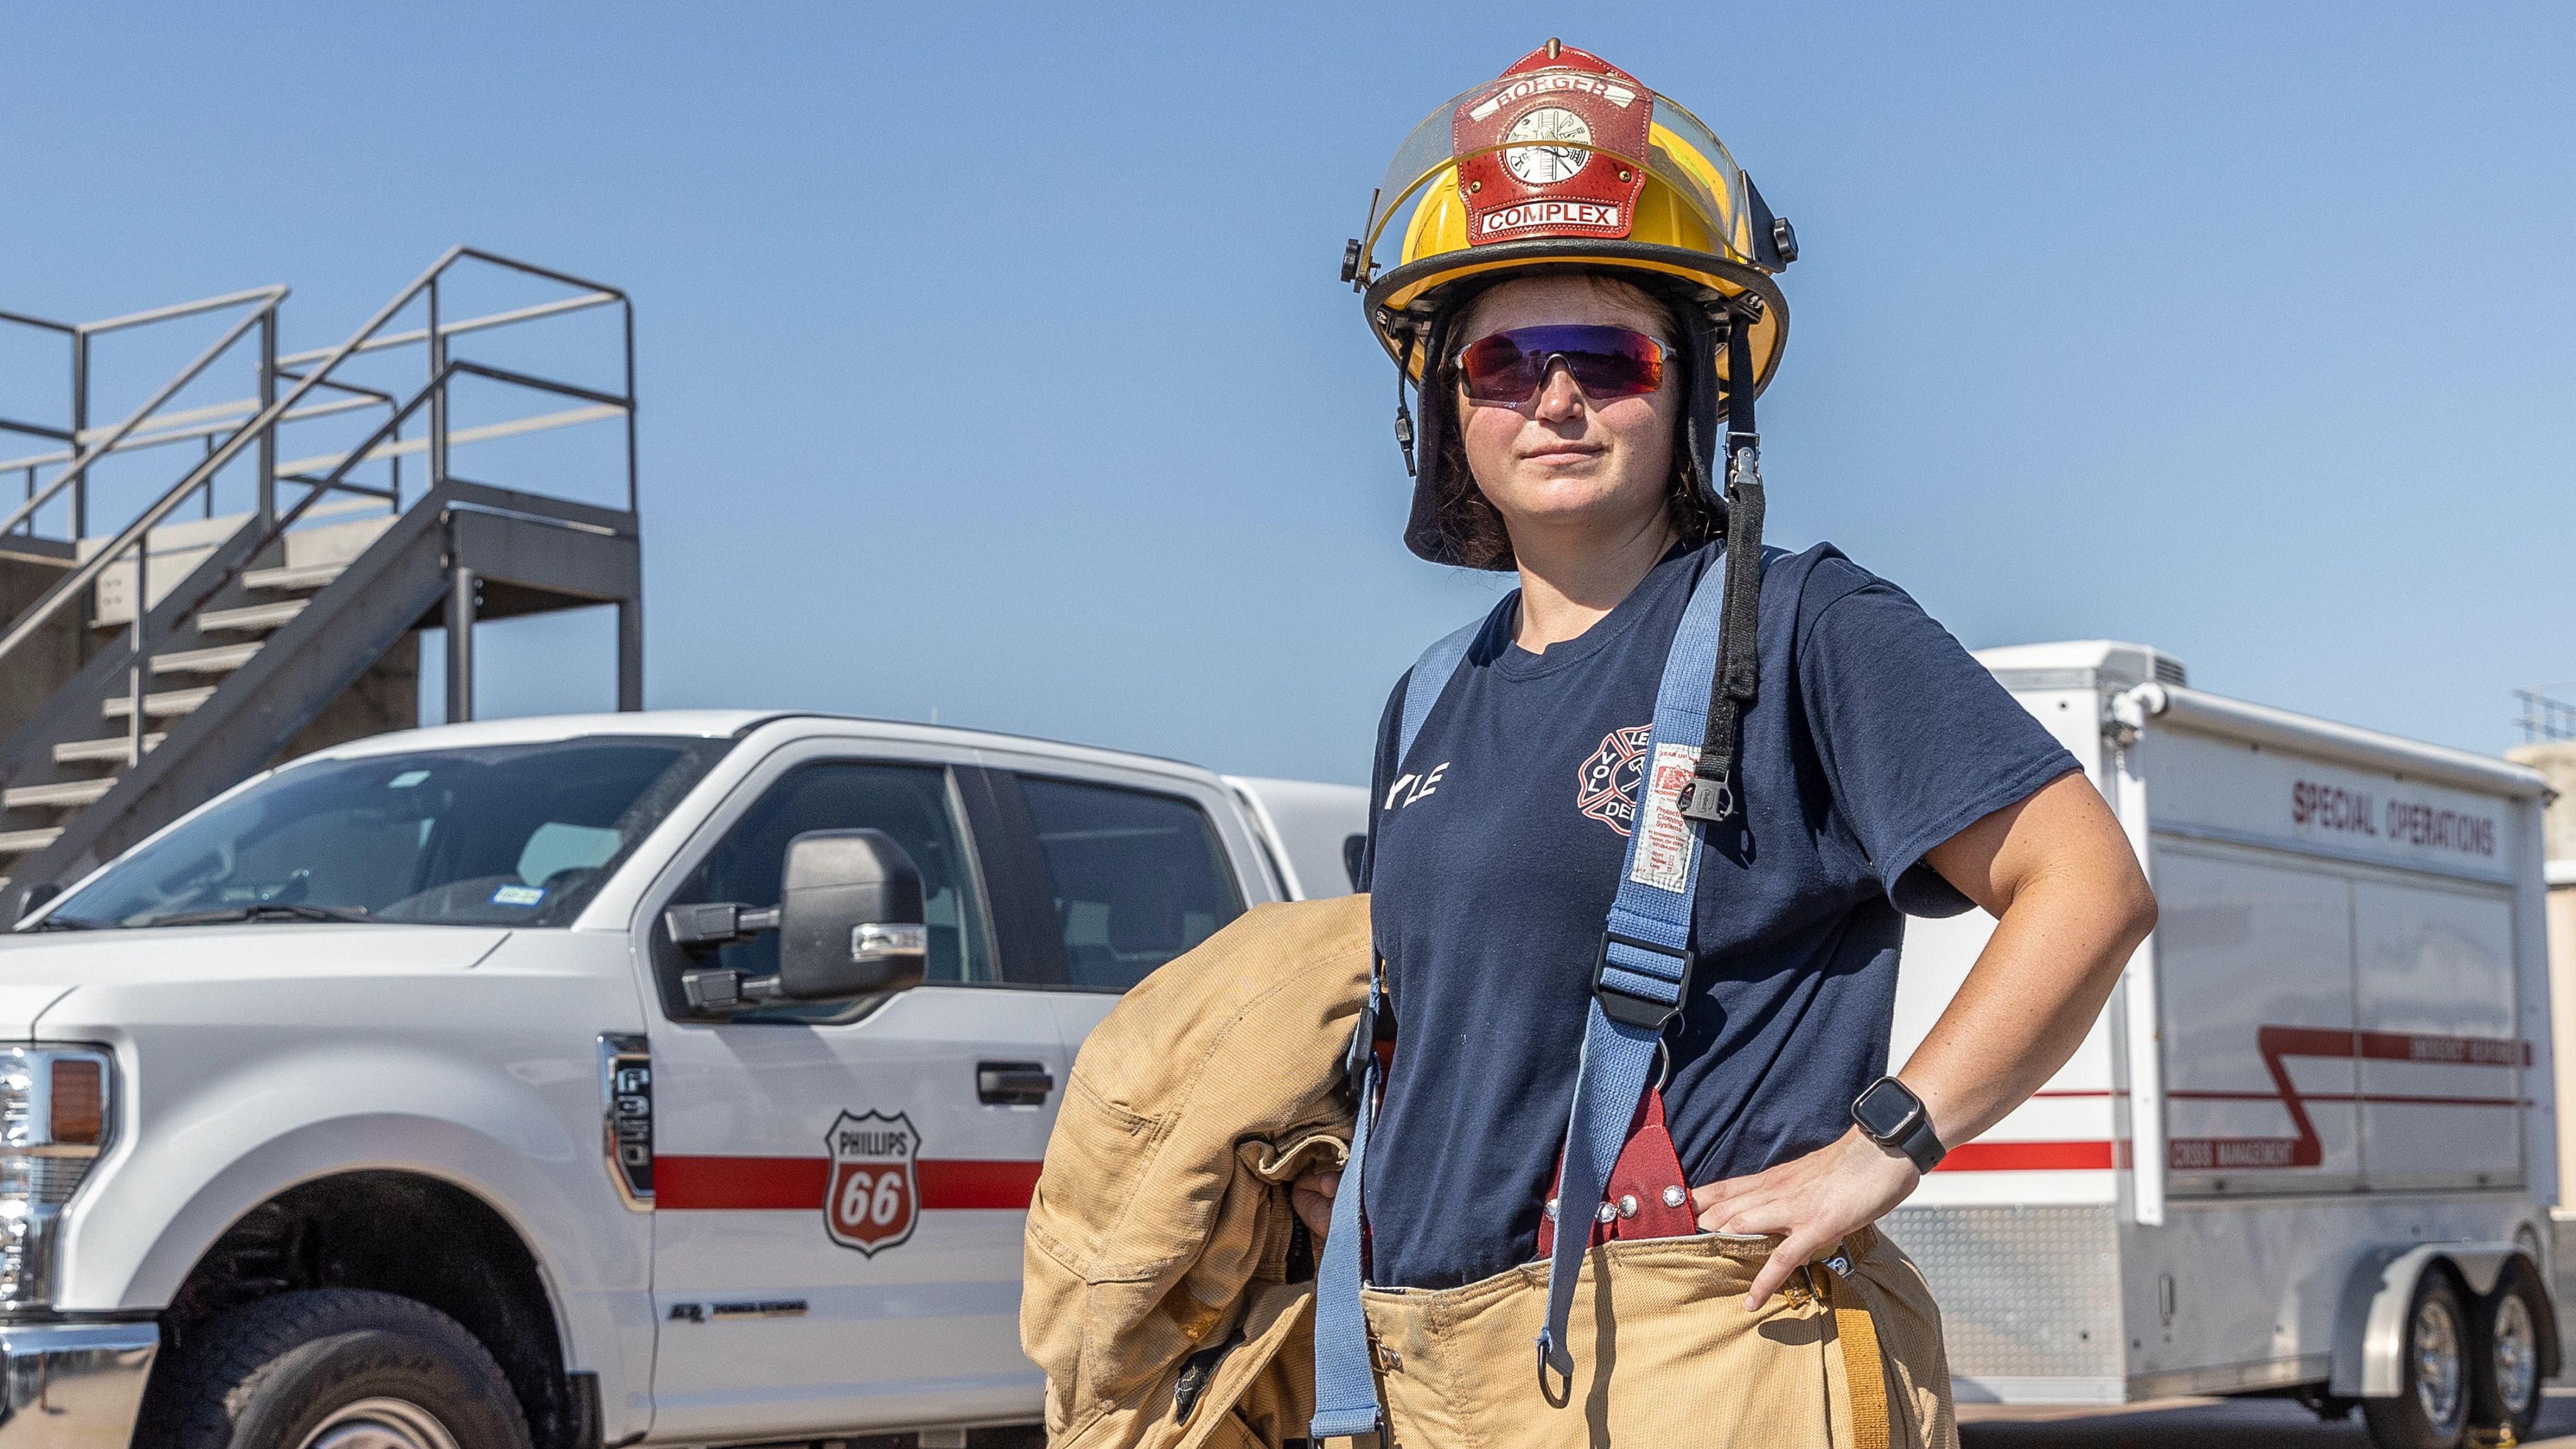 Employee in the aftermath of Hurricane Laura on the Gulf Coast. Phillips 66 donated substantially to that relief effort to support our employees, their families and communities.